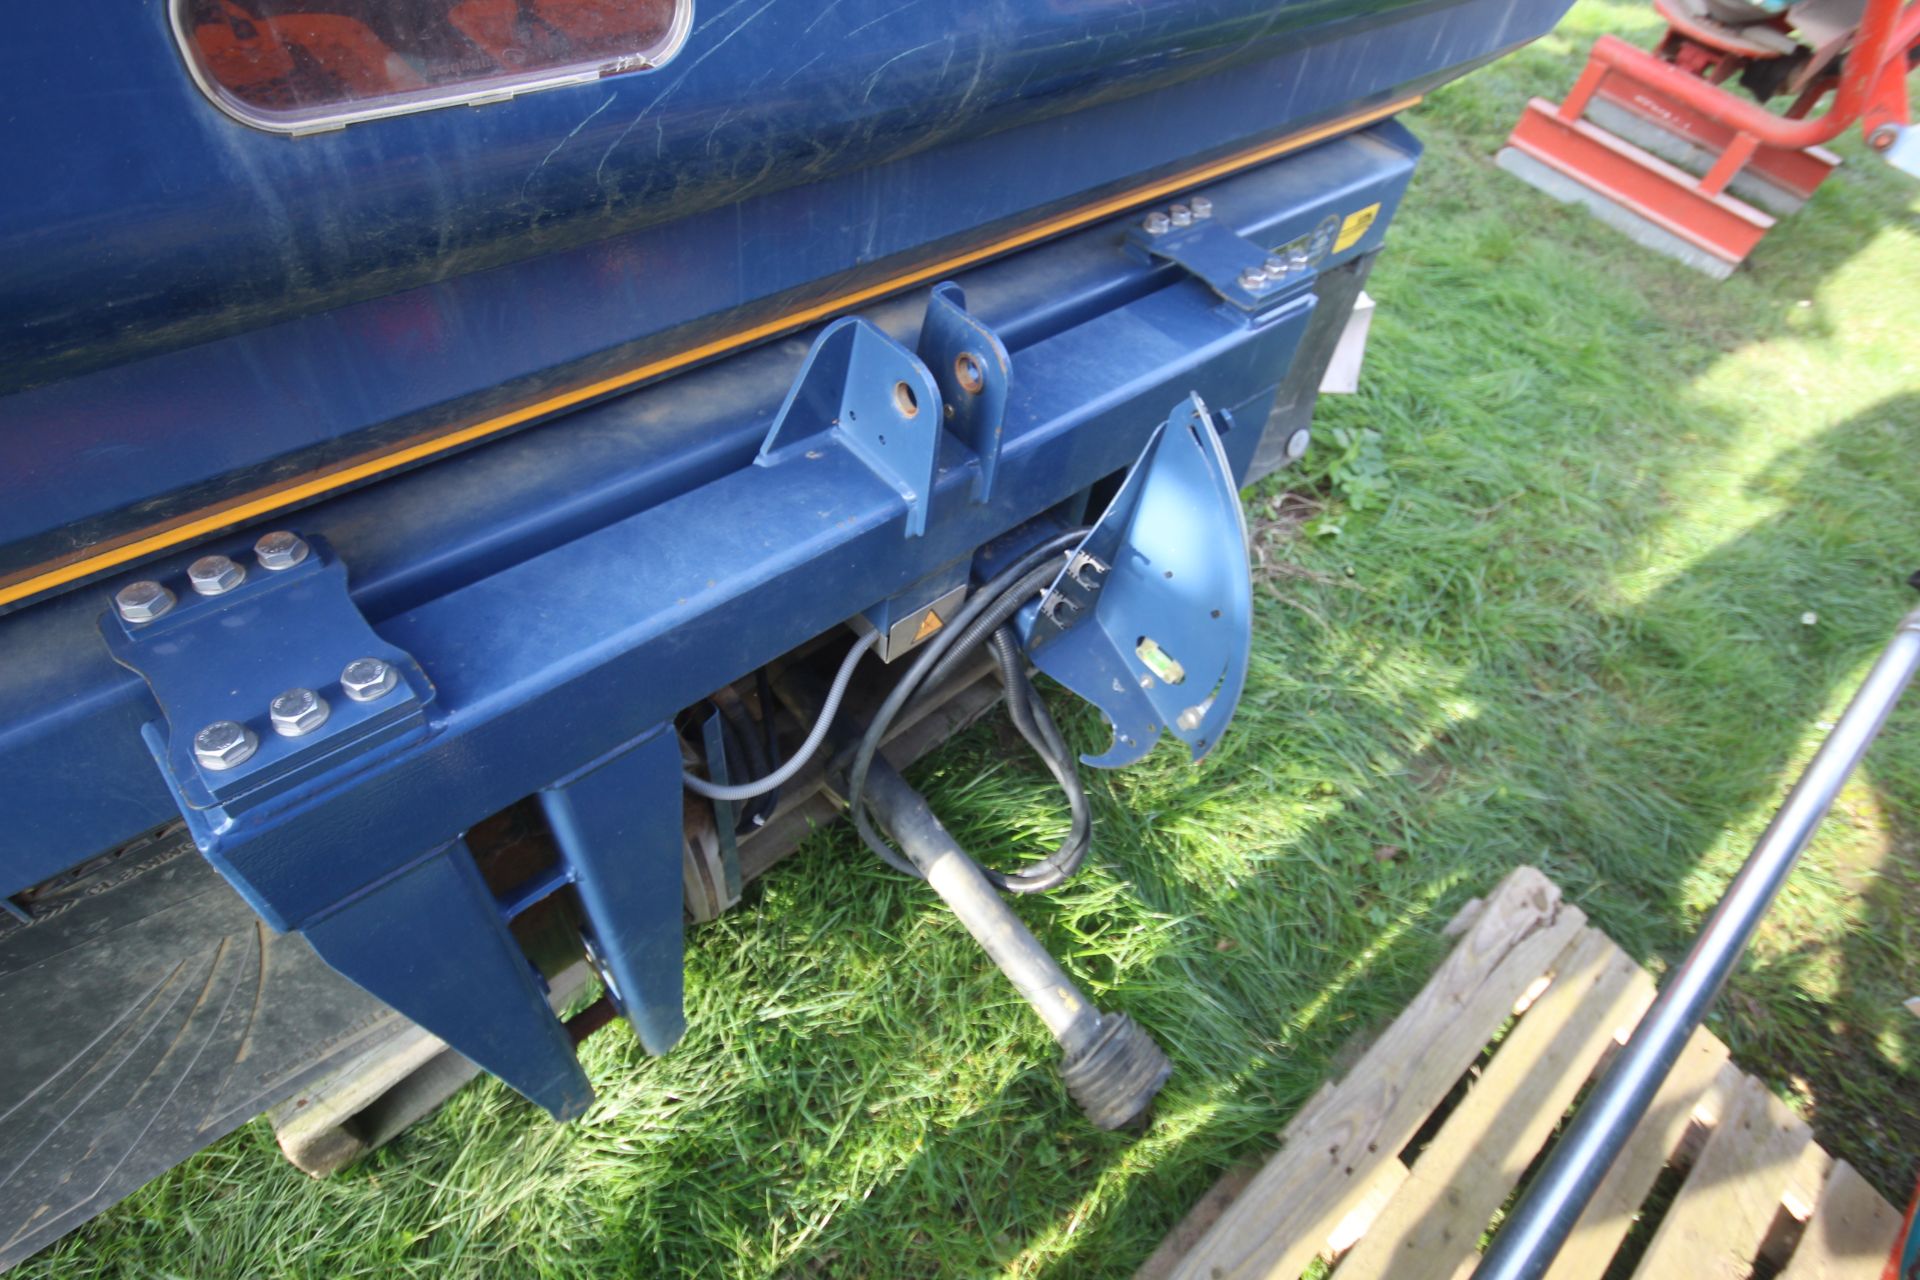 Bogballe M35W1 24m twin disc fertiliser spreader. 2019. Serial number 316. With weight cells and - Image 3 of 22